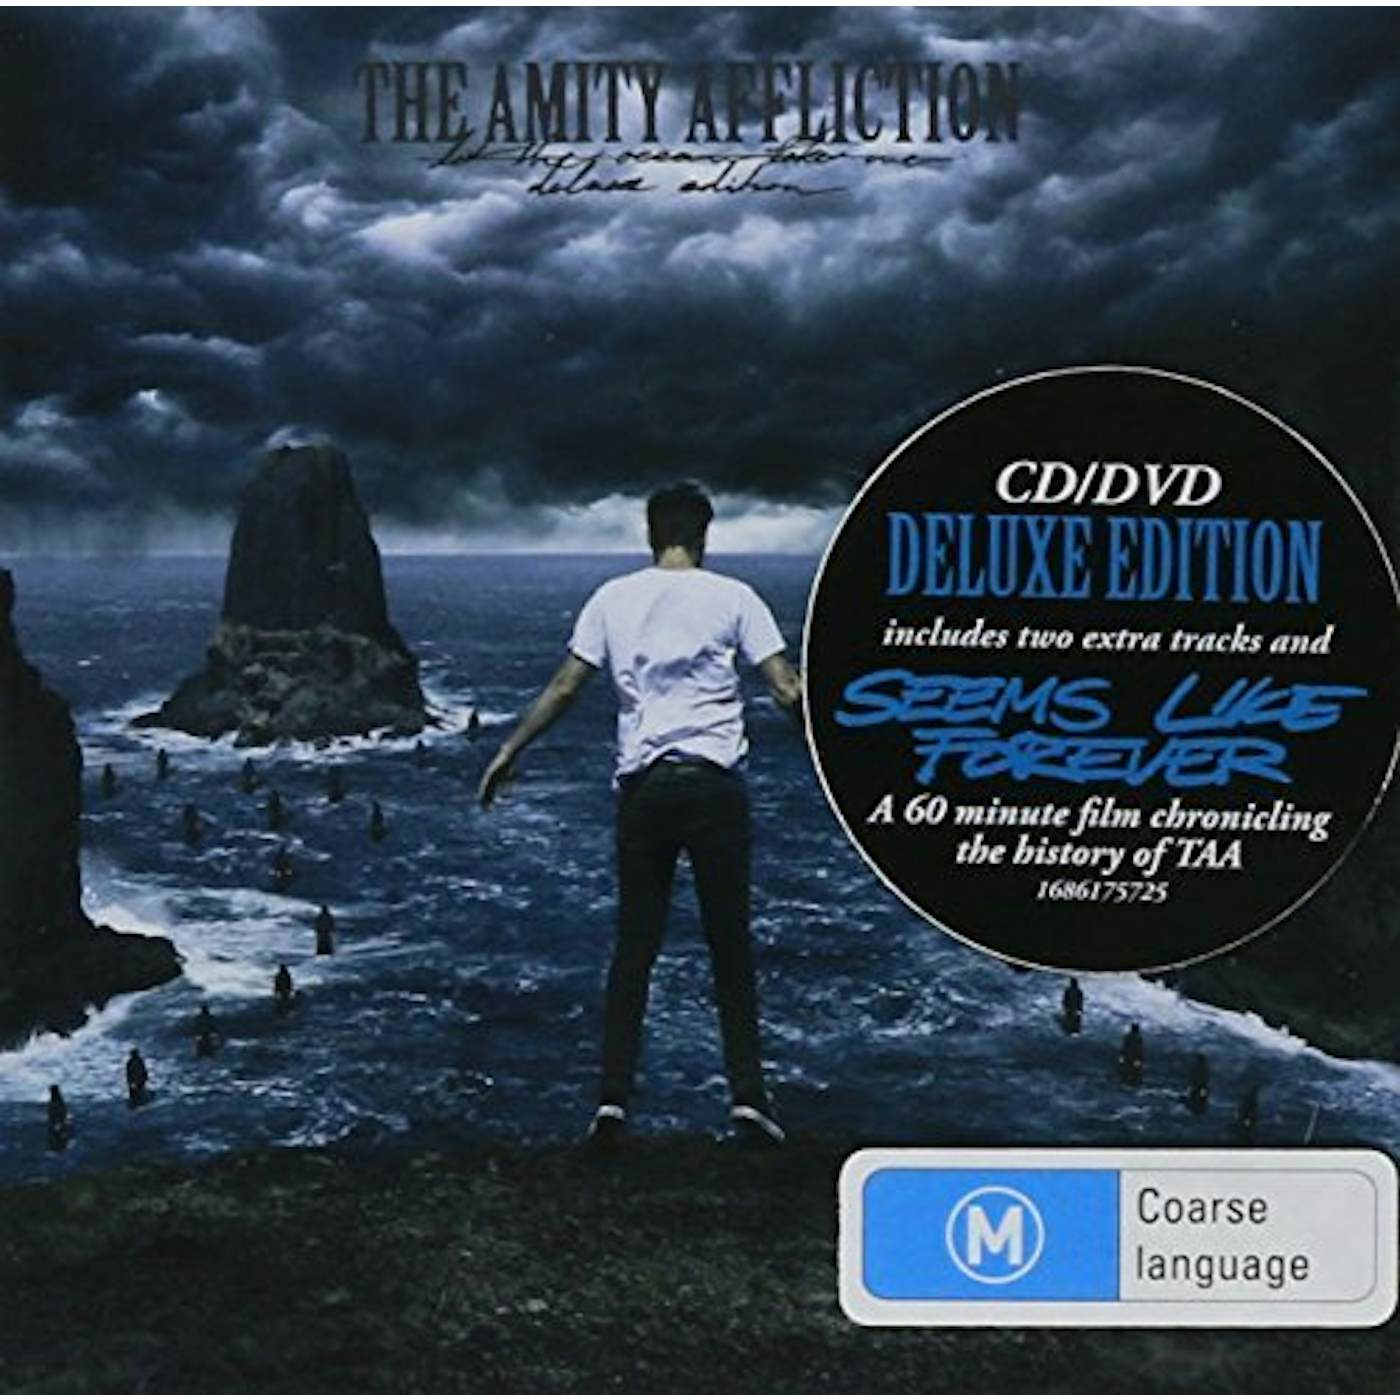 The Amity Affliction LET THE OCEAN TAKE ME (DELUXE EDITION) CD